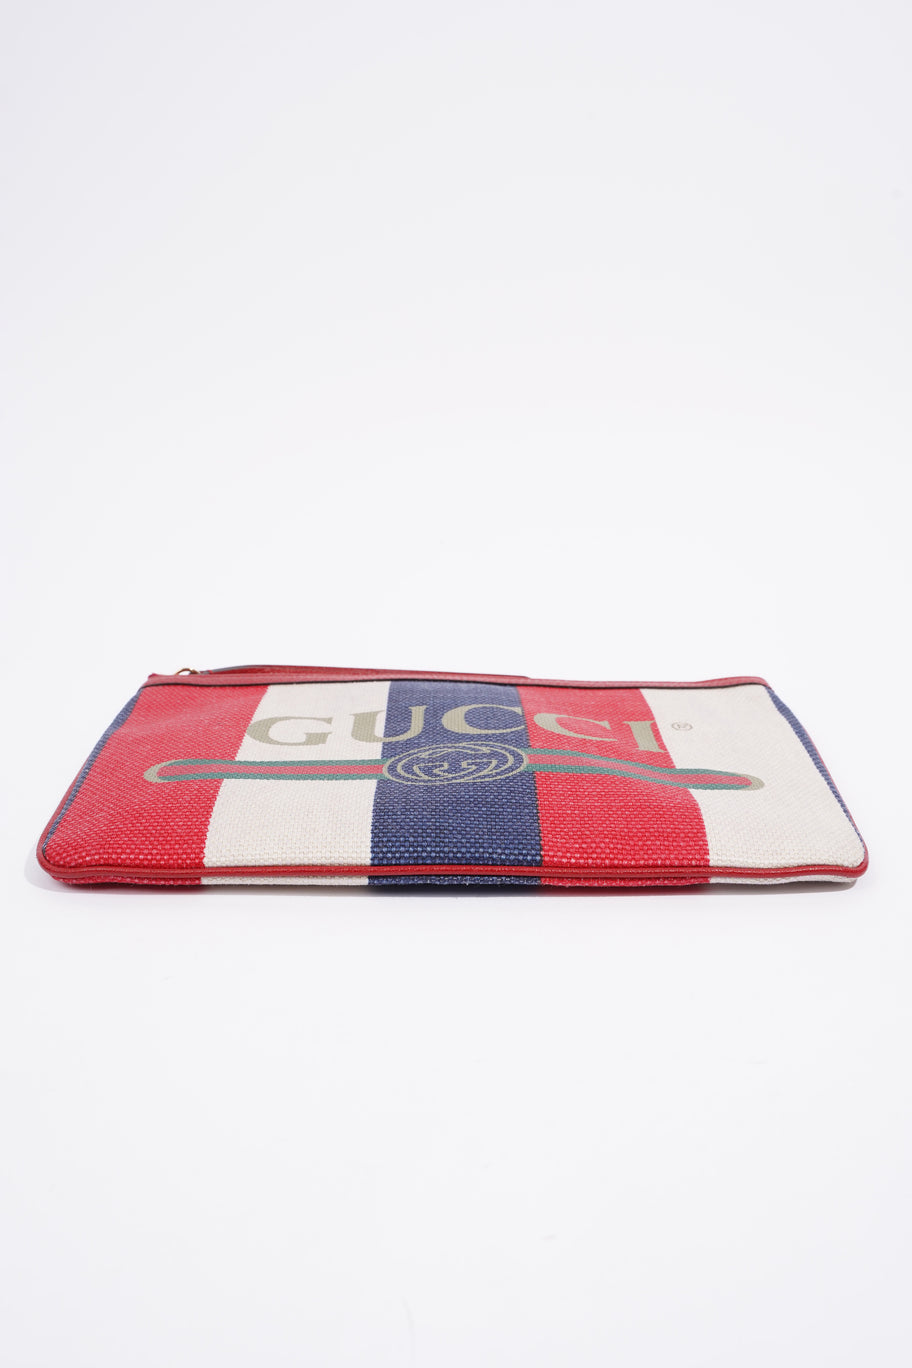 Clutch Red / White / Blue Canvas Image 6